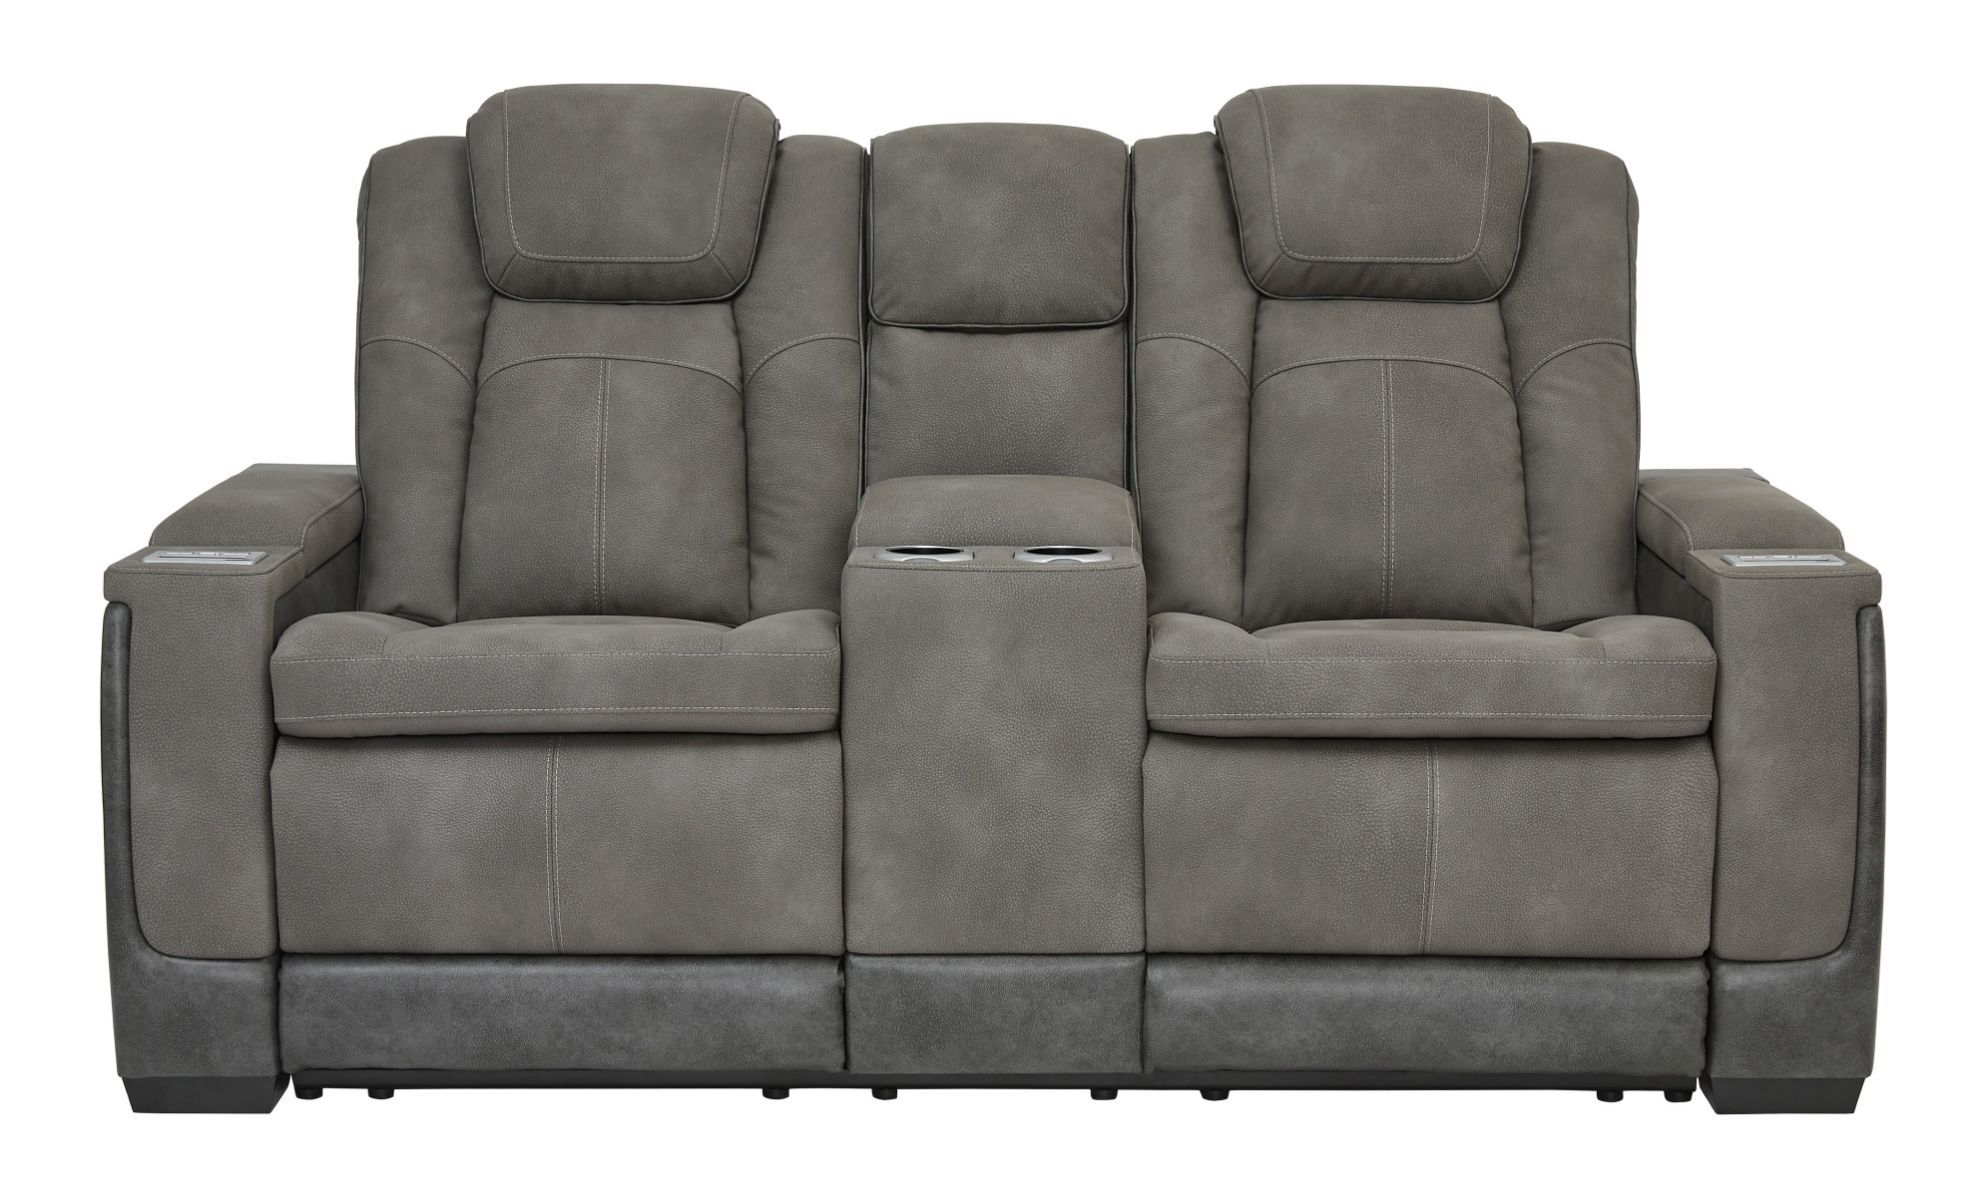 DuraPella Power Loveseat with Console